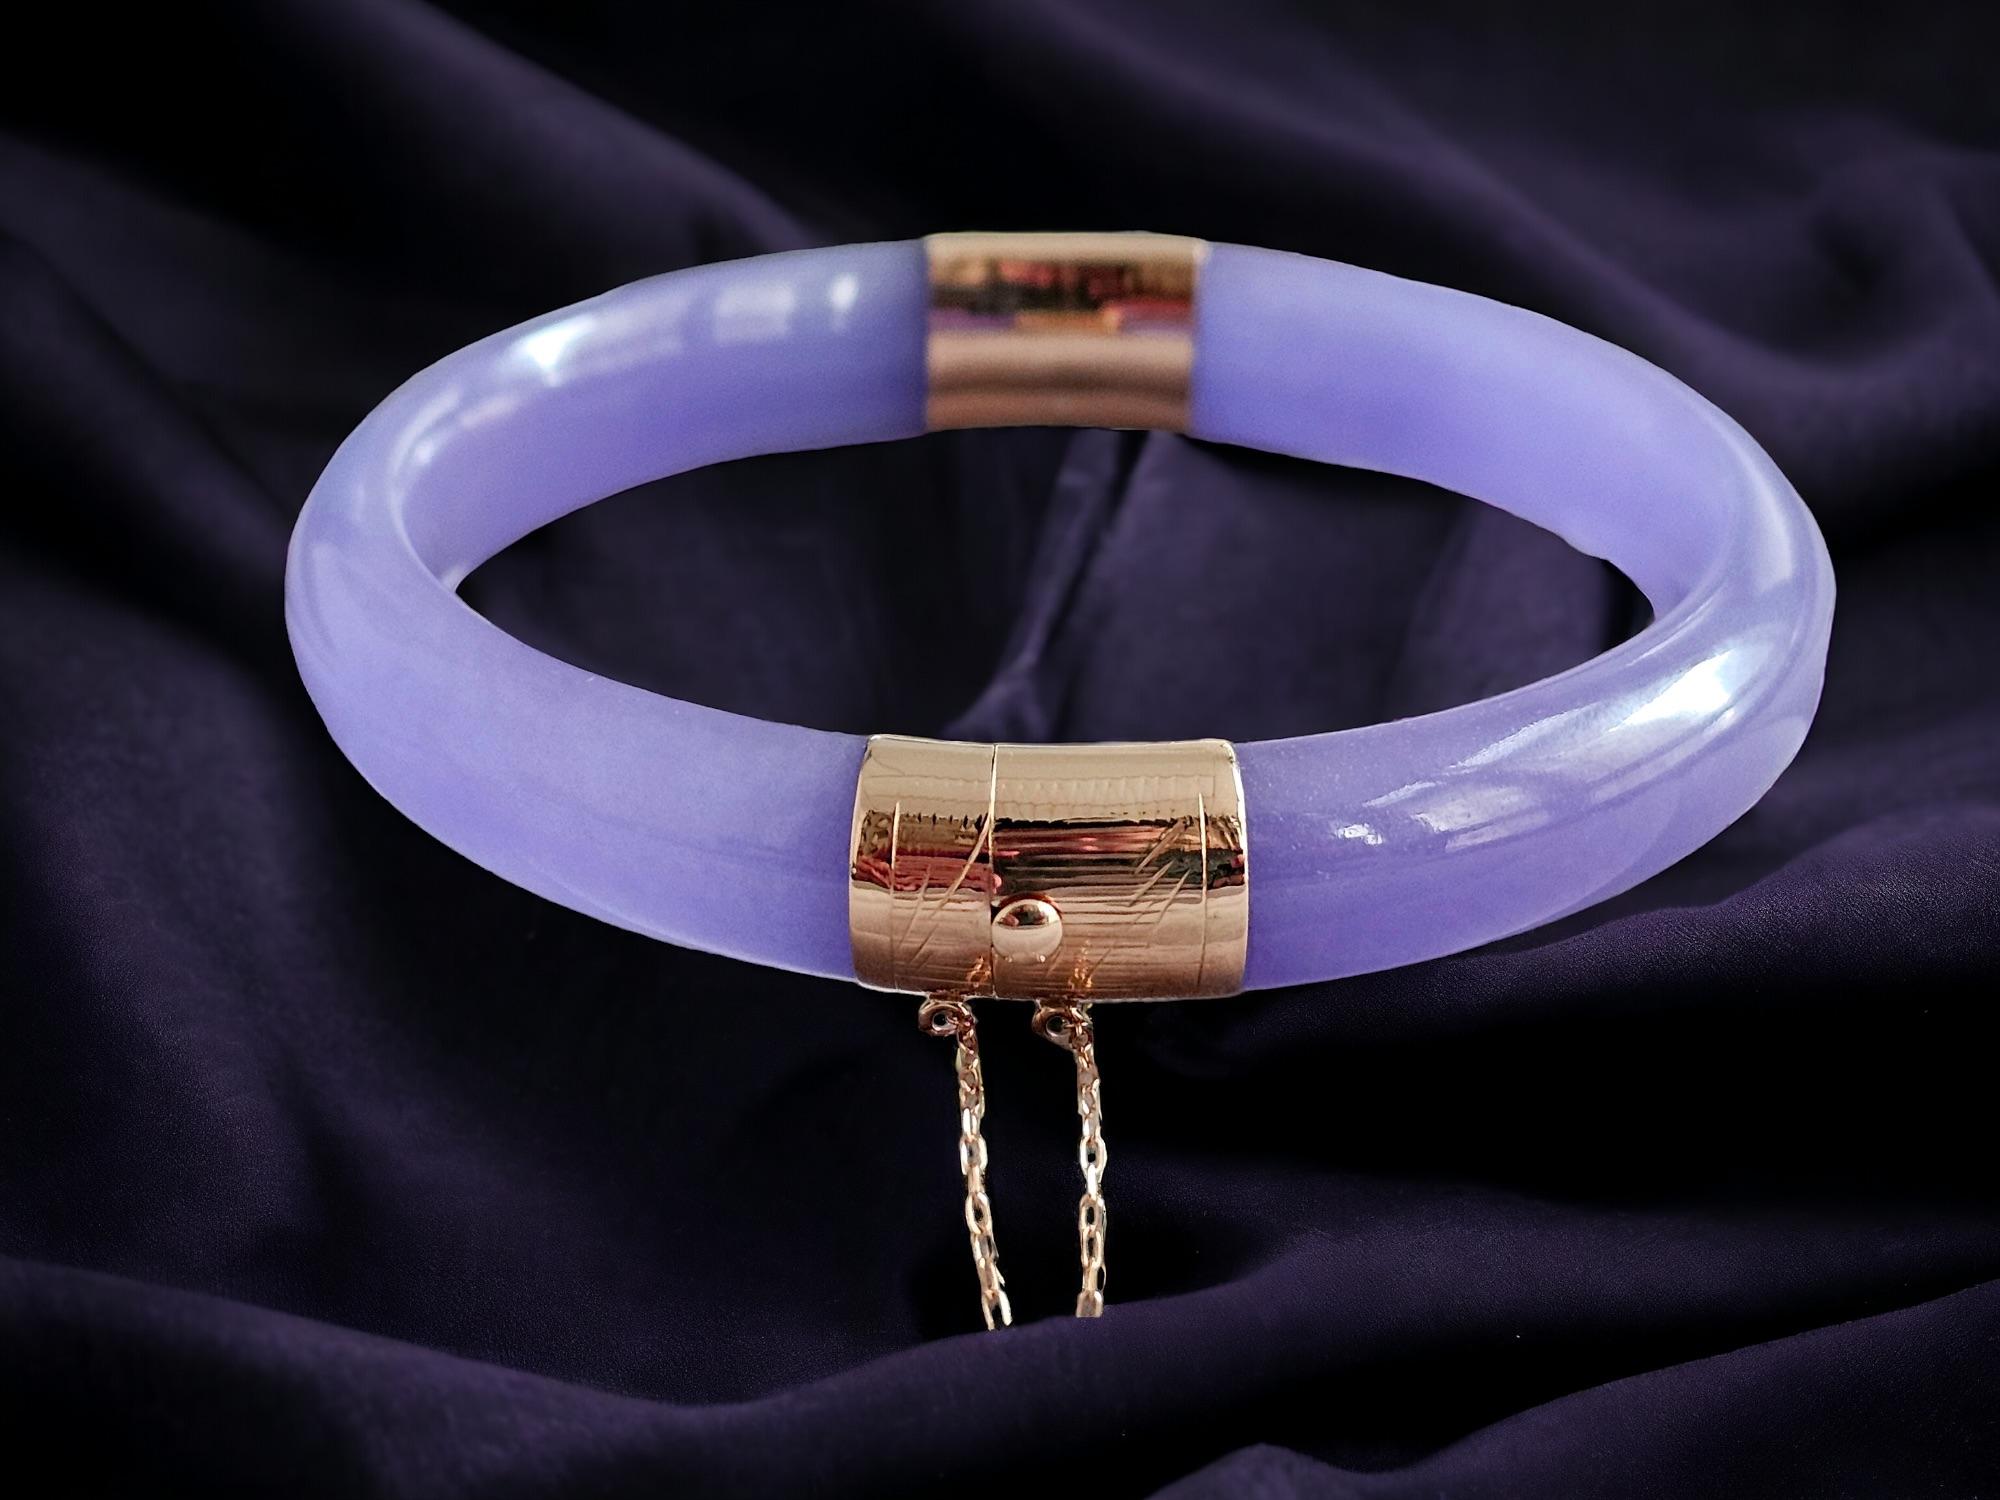 Viceroy's Circular Lavender Jade Bangle Bracelet (with 14K Yellow Gold) For Sale 3